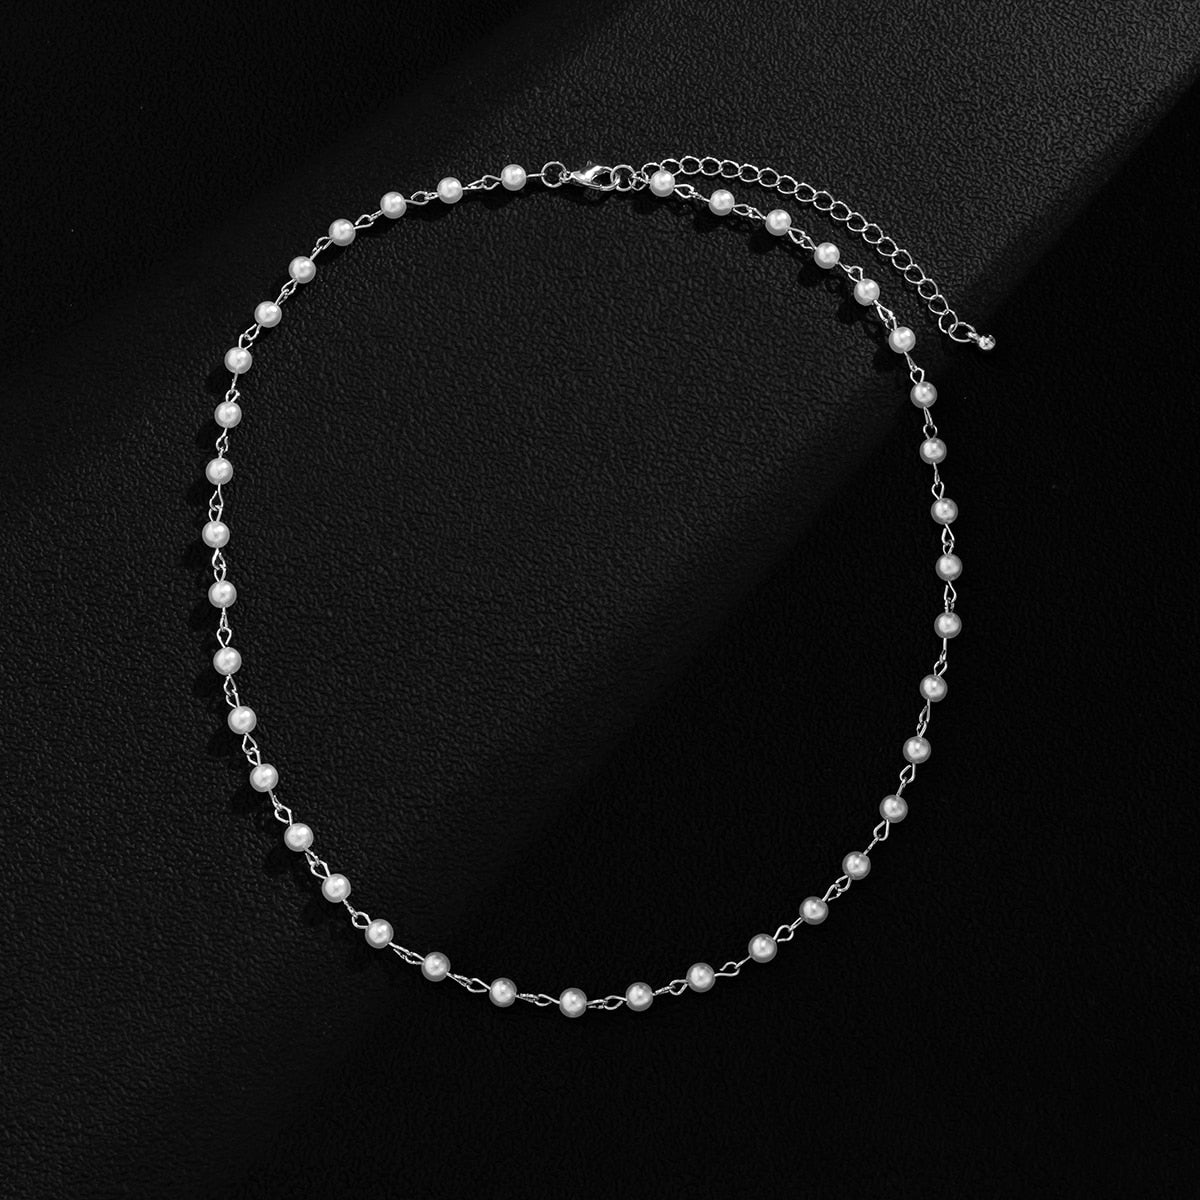 Small Pearl Beads Necklace